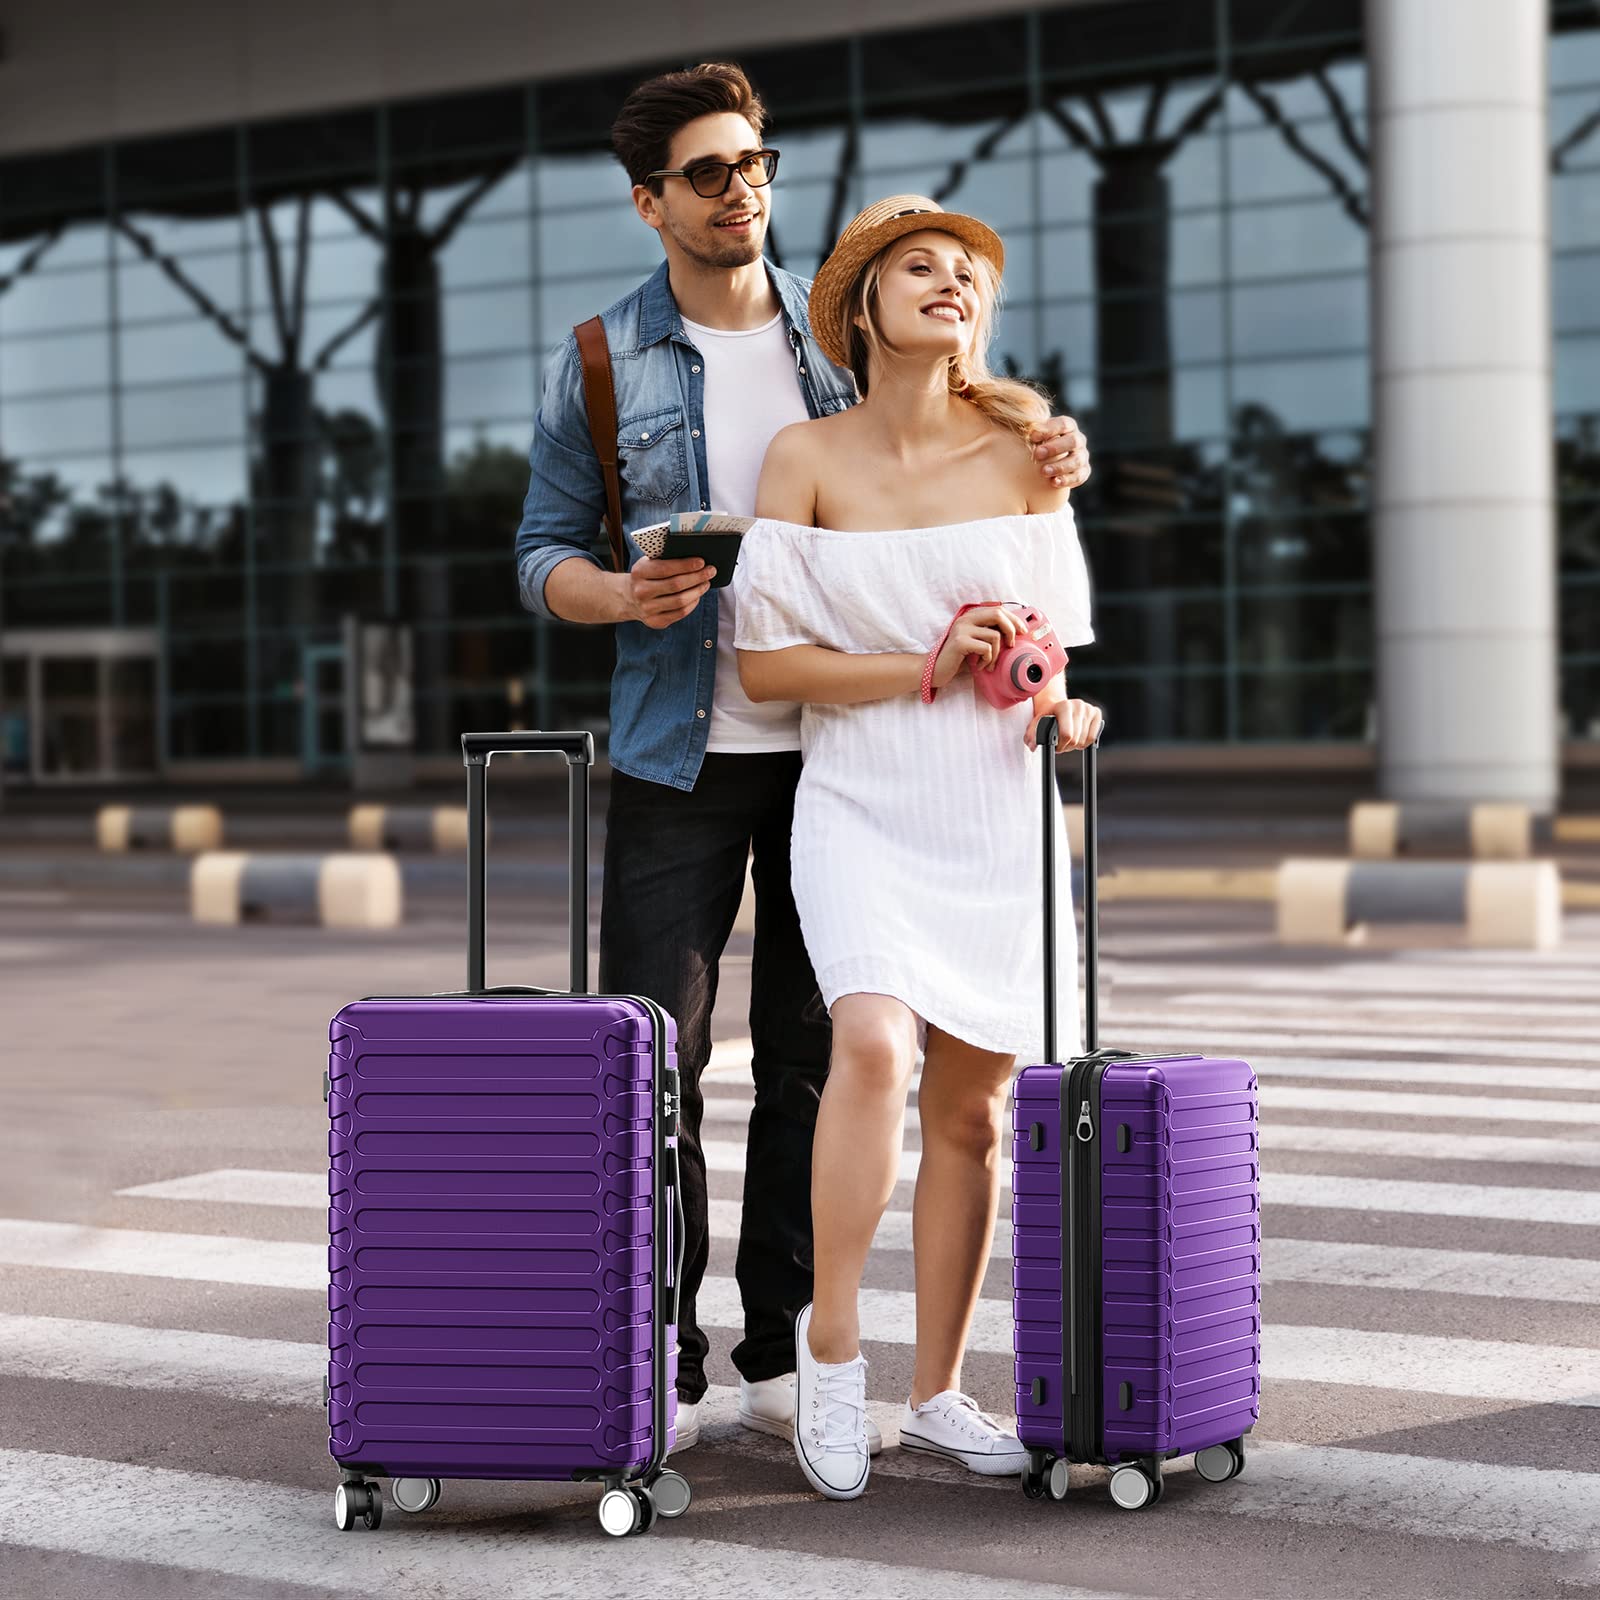 SHOWKOO Luggage Sets Expandable ABS Hardshell 3pcs Clearance Luggage Hardside Lightweight Durable Suitcase sets Spinner Wheels Suitcase with TSA Lock (Purple)